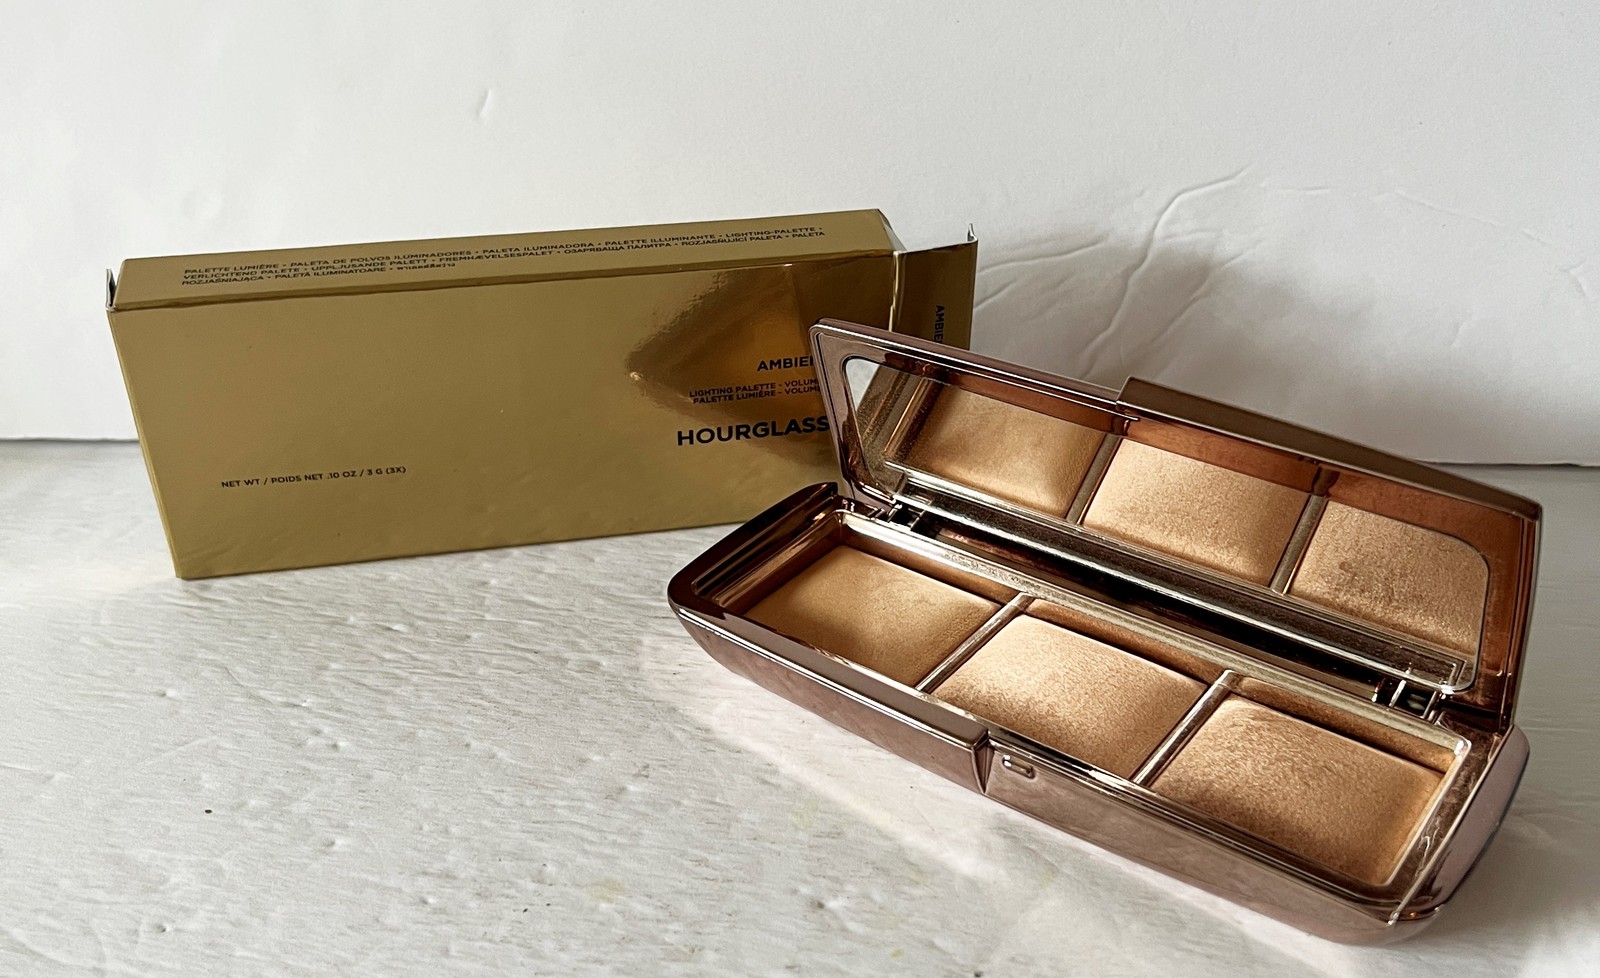 Primary image for Hourglass ambient lighting palette vollume II .10oz/3g Boxed